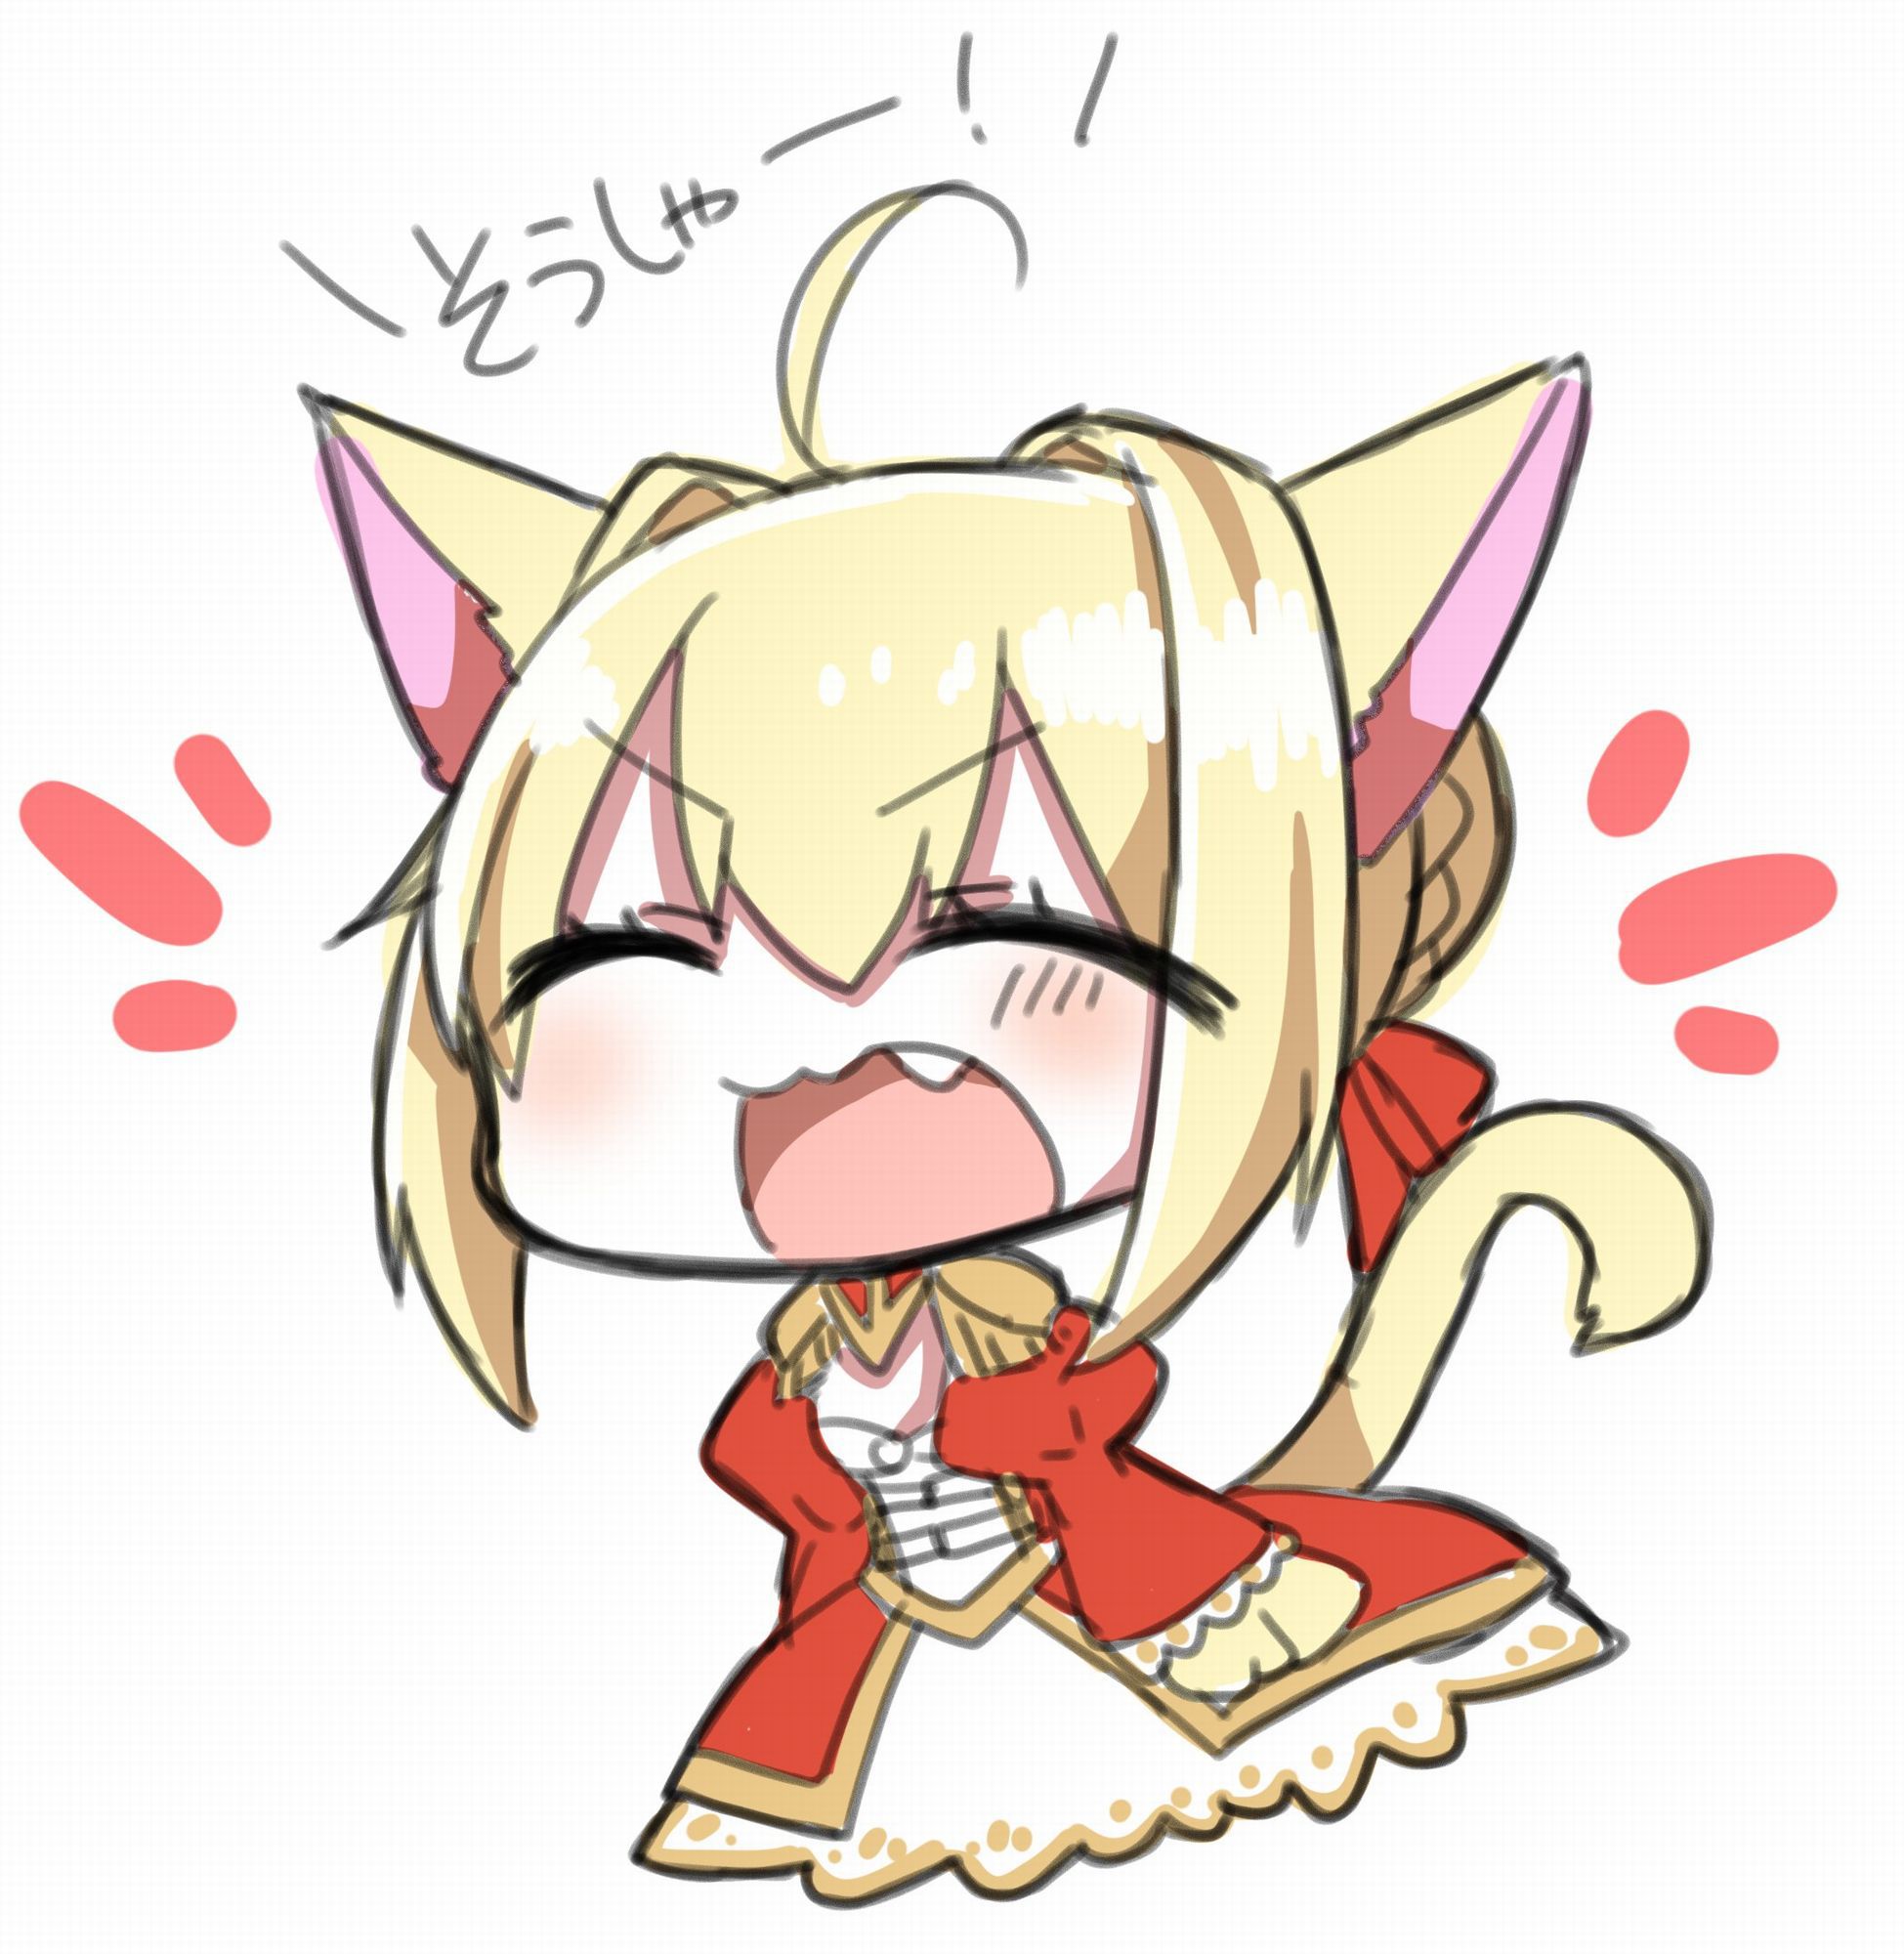 [Secondary ZIP] is about to start anime 100 pieces of cute image summary of Nero Claudius so soon 38